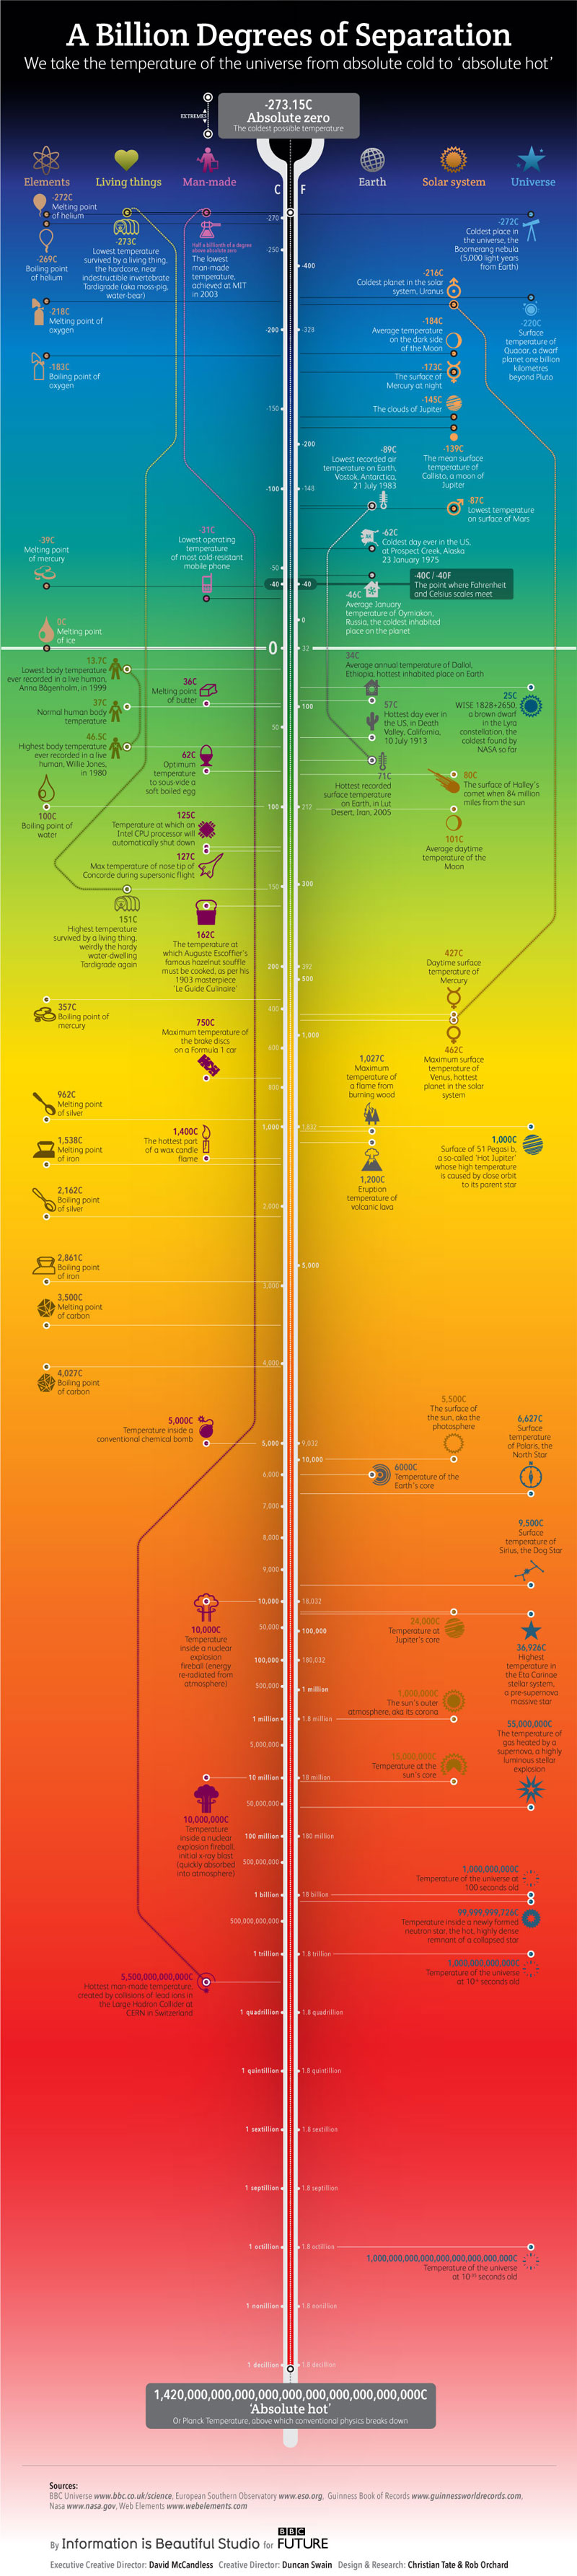 From-Absolute-Zero-To-'Absolute-Hot'-and-the-Billion-Degrees-in-Between-Infographic